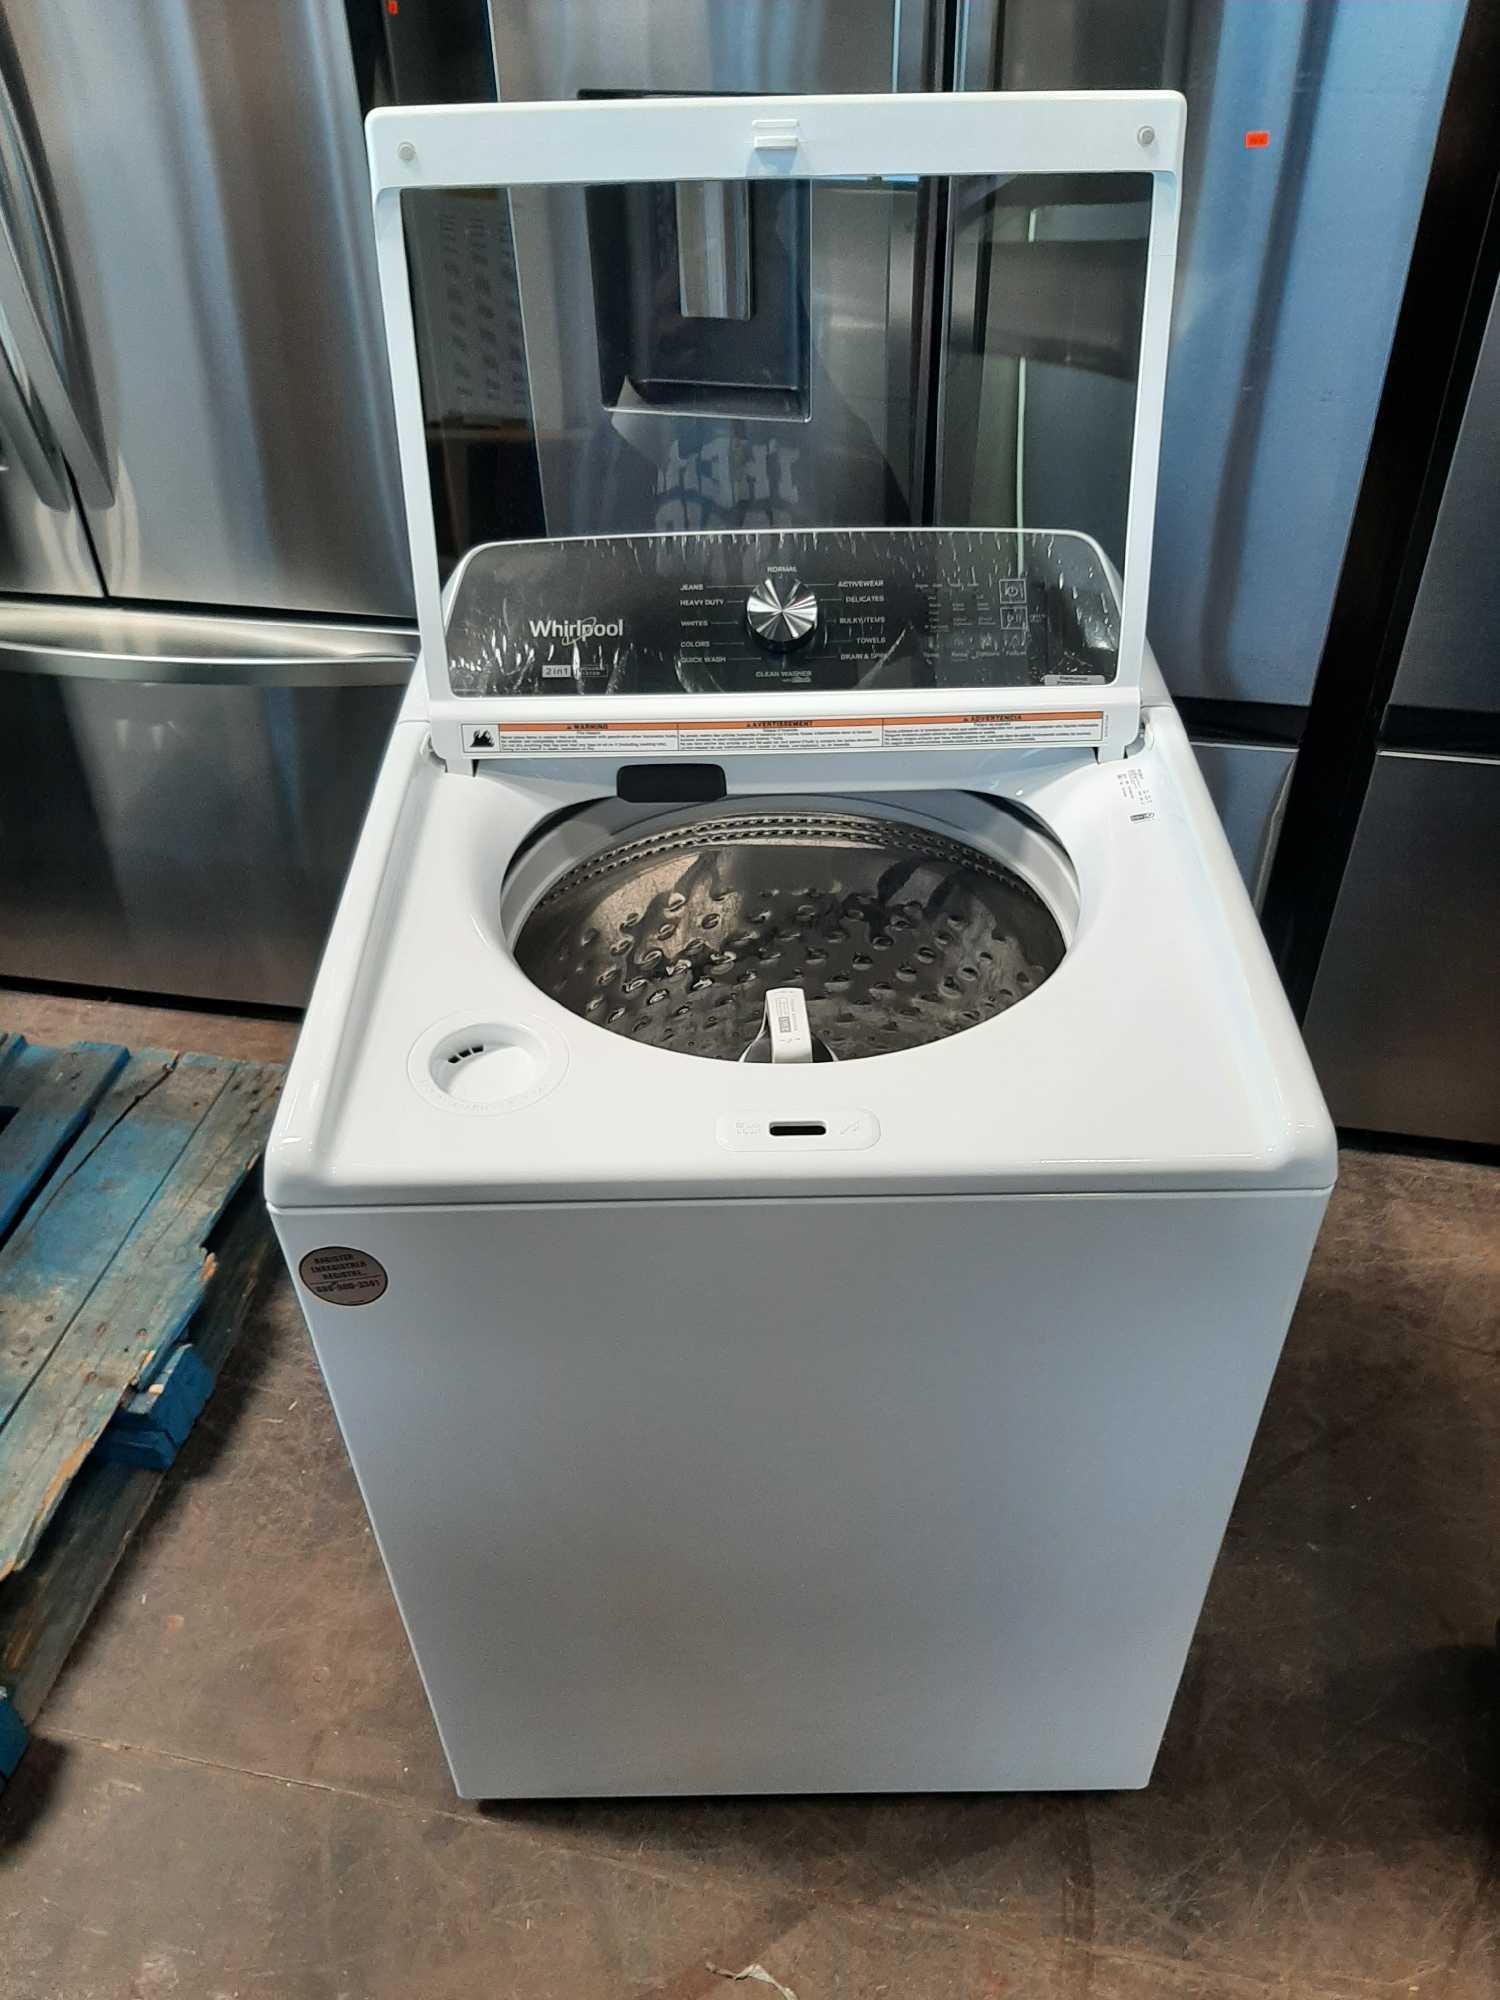 Whirlpool 4.7 Cu. Ft. Top Load Washer*PREVIOUSLY INSTALLED*